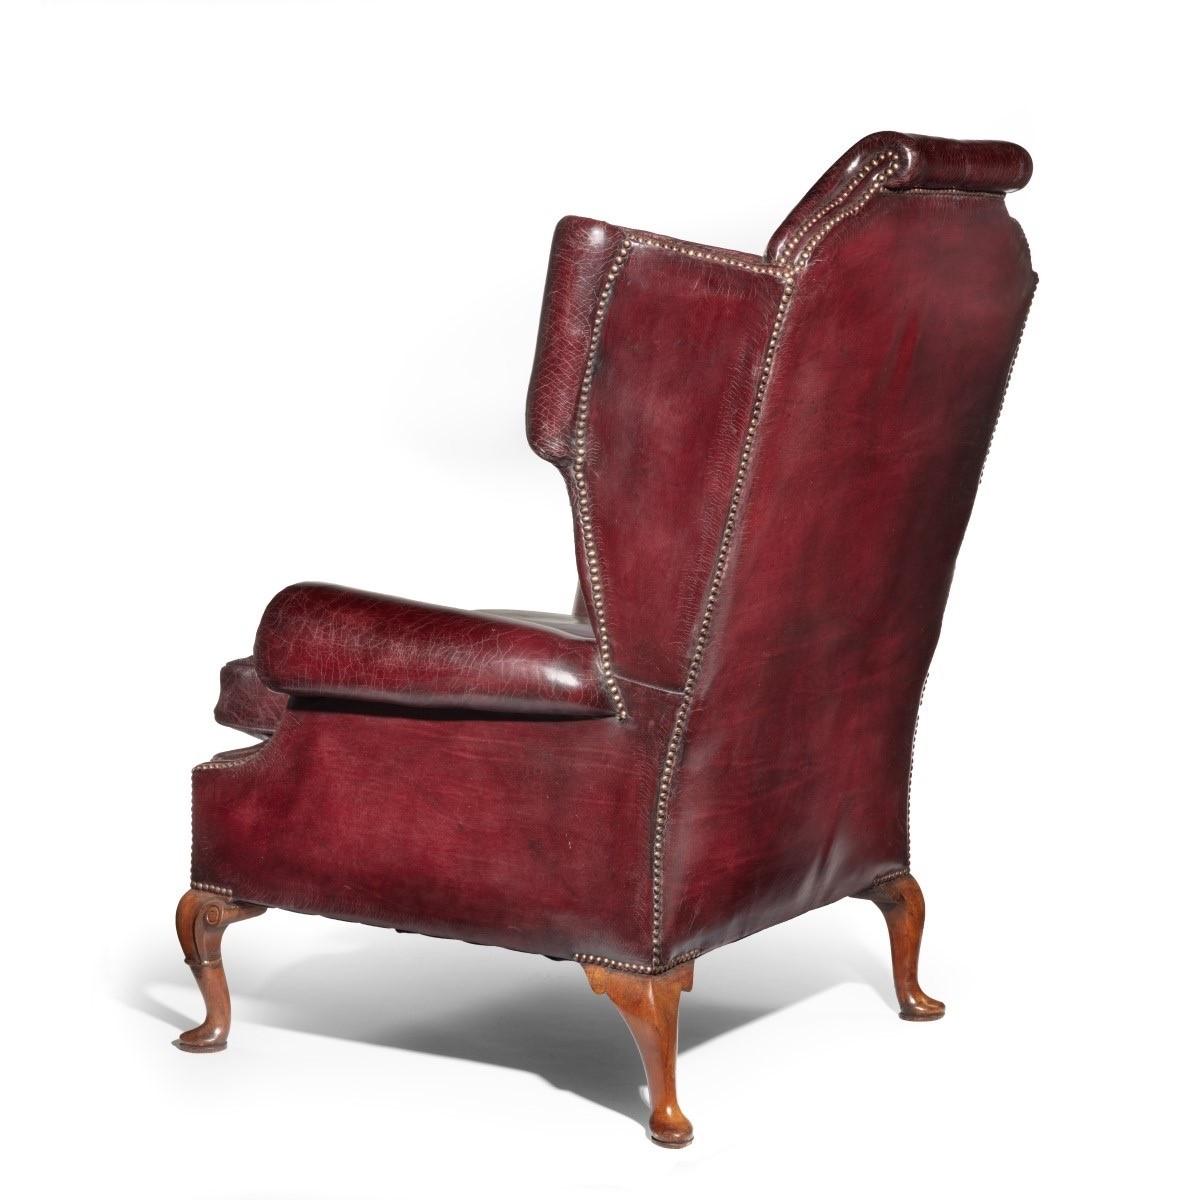 A Generous Leather Wing arm chair